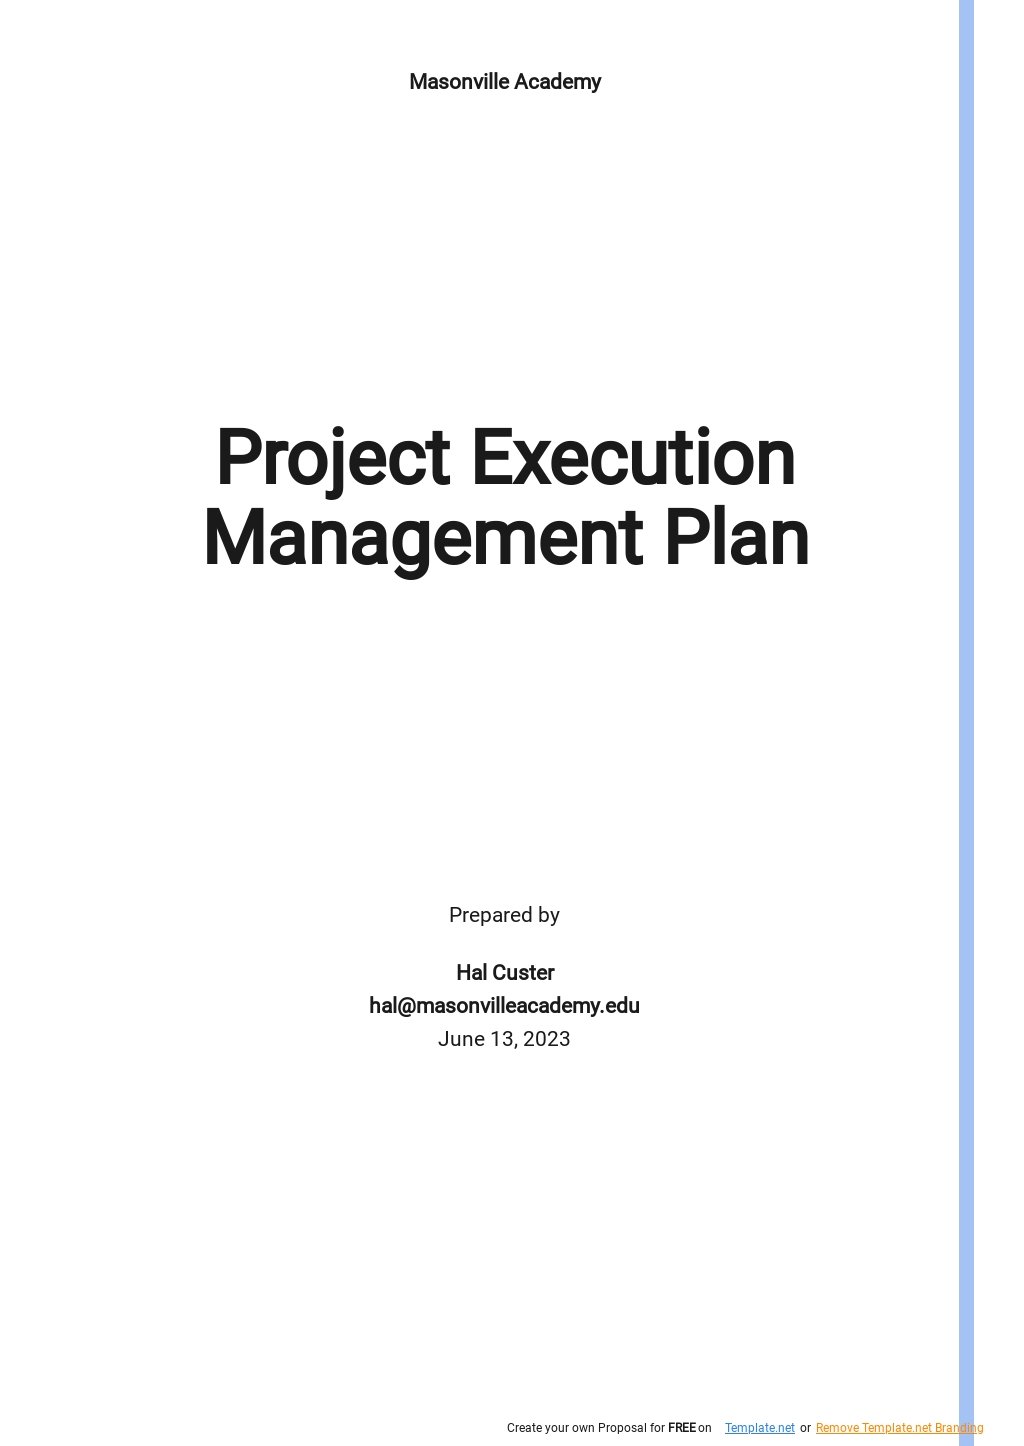 Simple Project Execution Management Plan Template